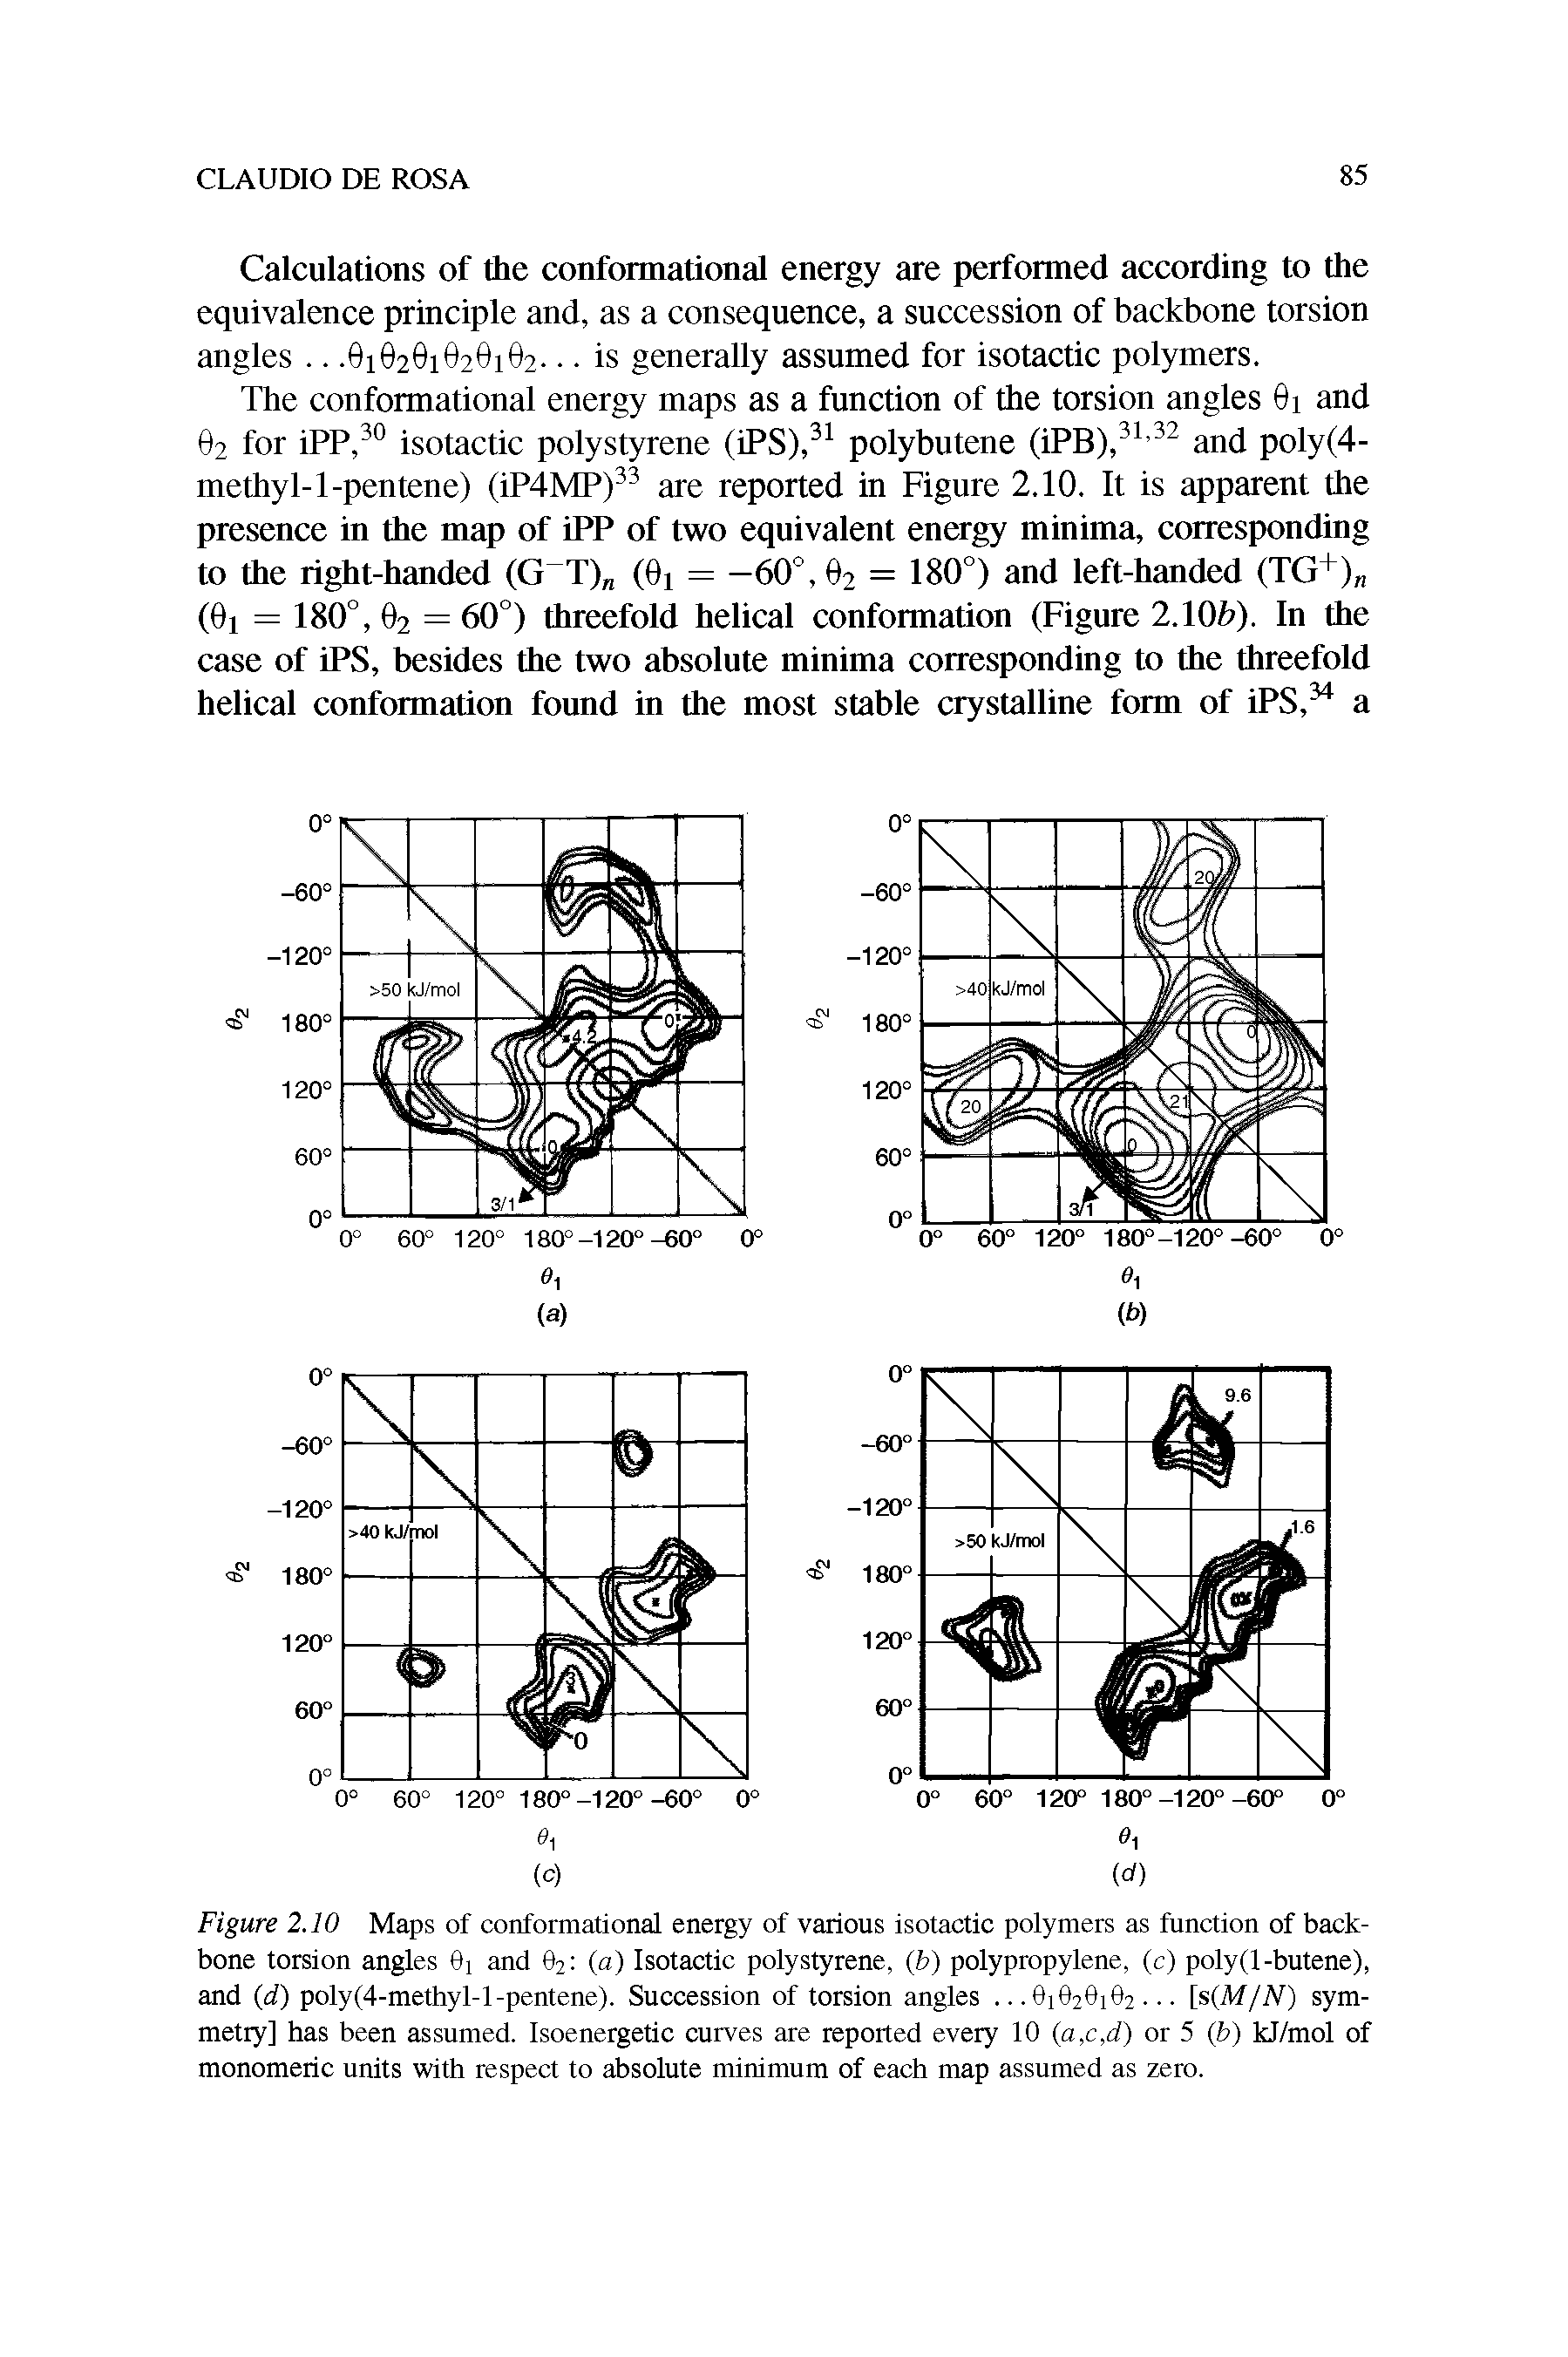 Figure 2.10 Maps of conformational energy of various isotactic polymers as function of backbone torsion angles 0i and 02 (a) Isotactic polystyrene, (b) polypropylene, (c) poly(l-butene), and (d) poly(4-methyl-l-pentene). Succession of torsion angles. .. 0i020i02 [s(M/N) symmetry] has been assumed. Isoenergetic curves are reported every 10 (a,c,d) or 5 (b) kJ/mol of monomeric units with respect to absolute minimum of each map assumed as zero.